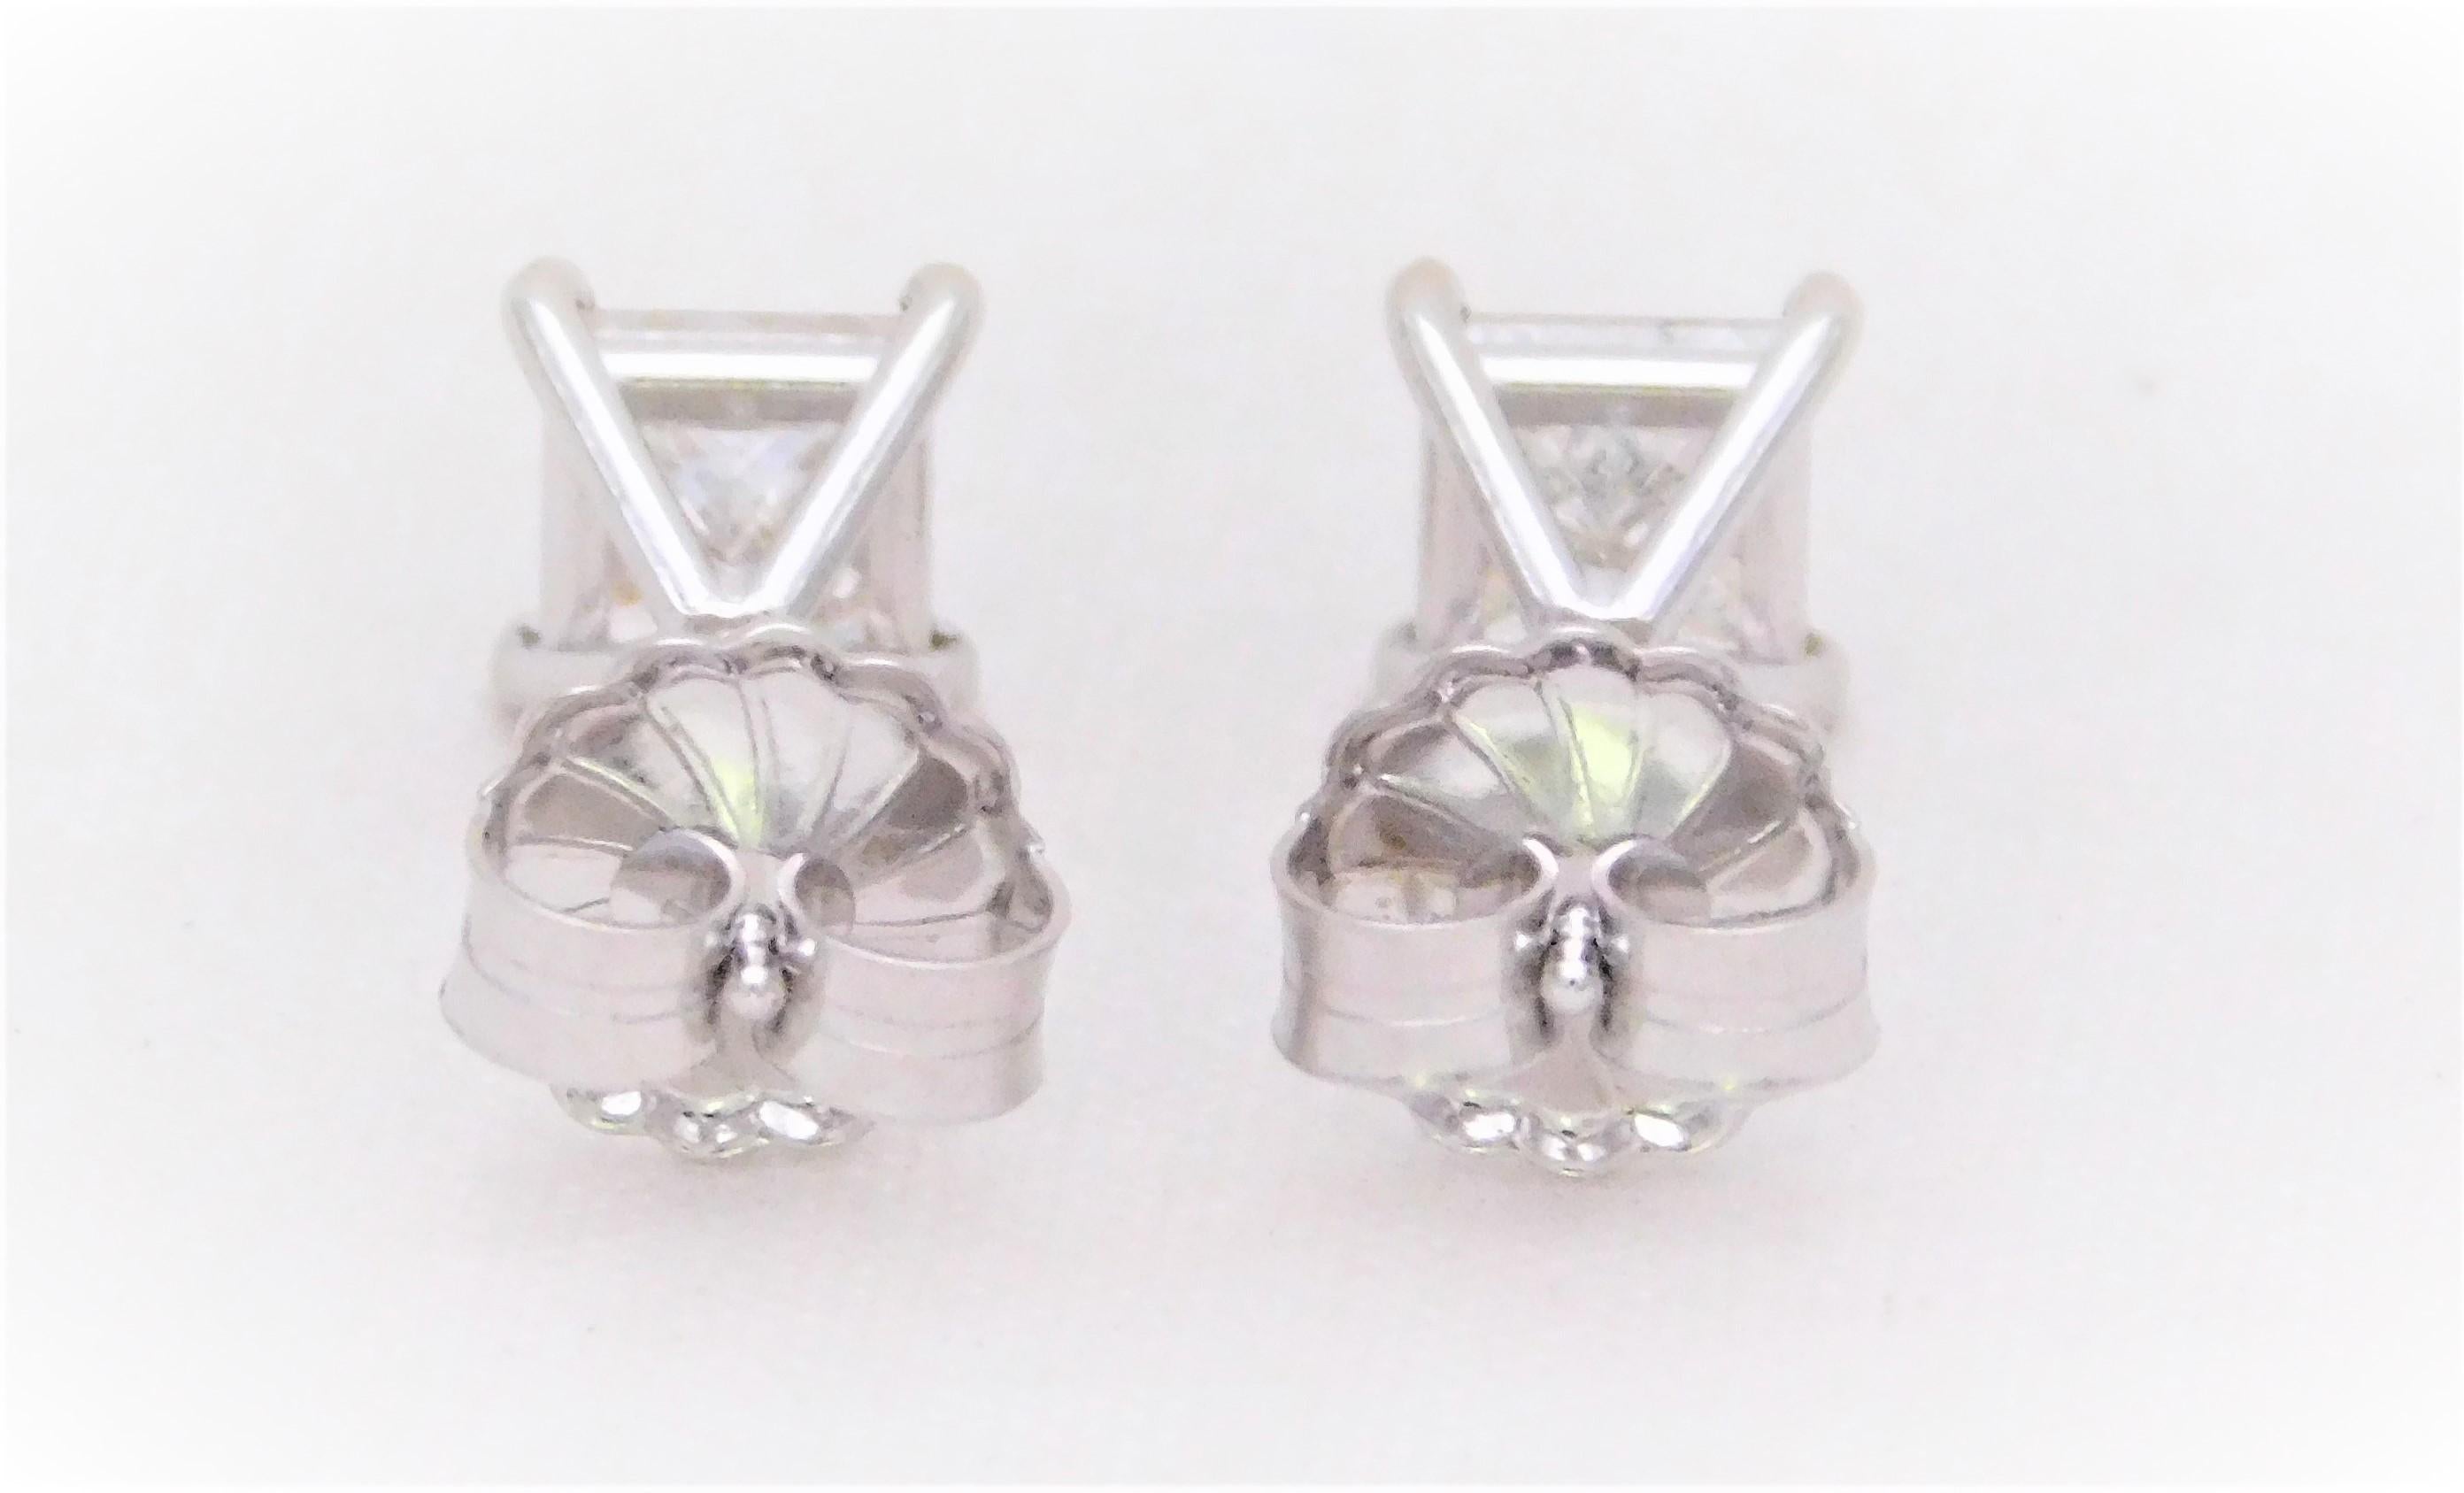 1.26 Carat Princess-Cut Diamond Stud Earrings in 18 Karat White Gold In New Condition For Sale In Metairie, LA